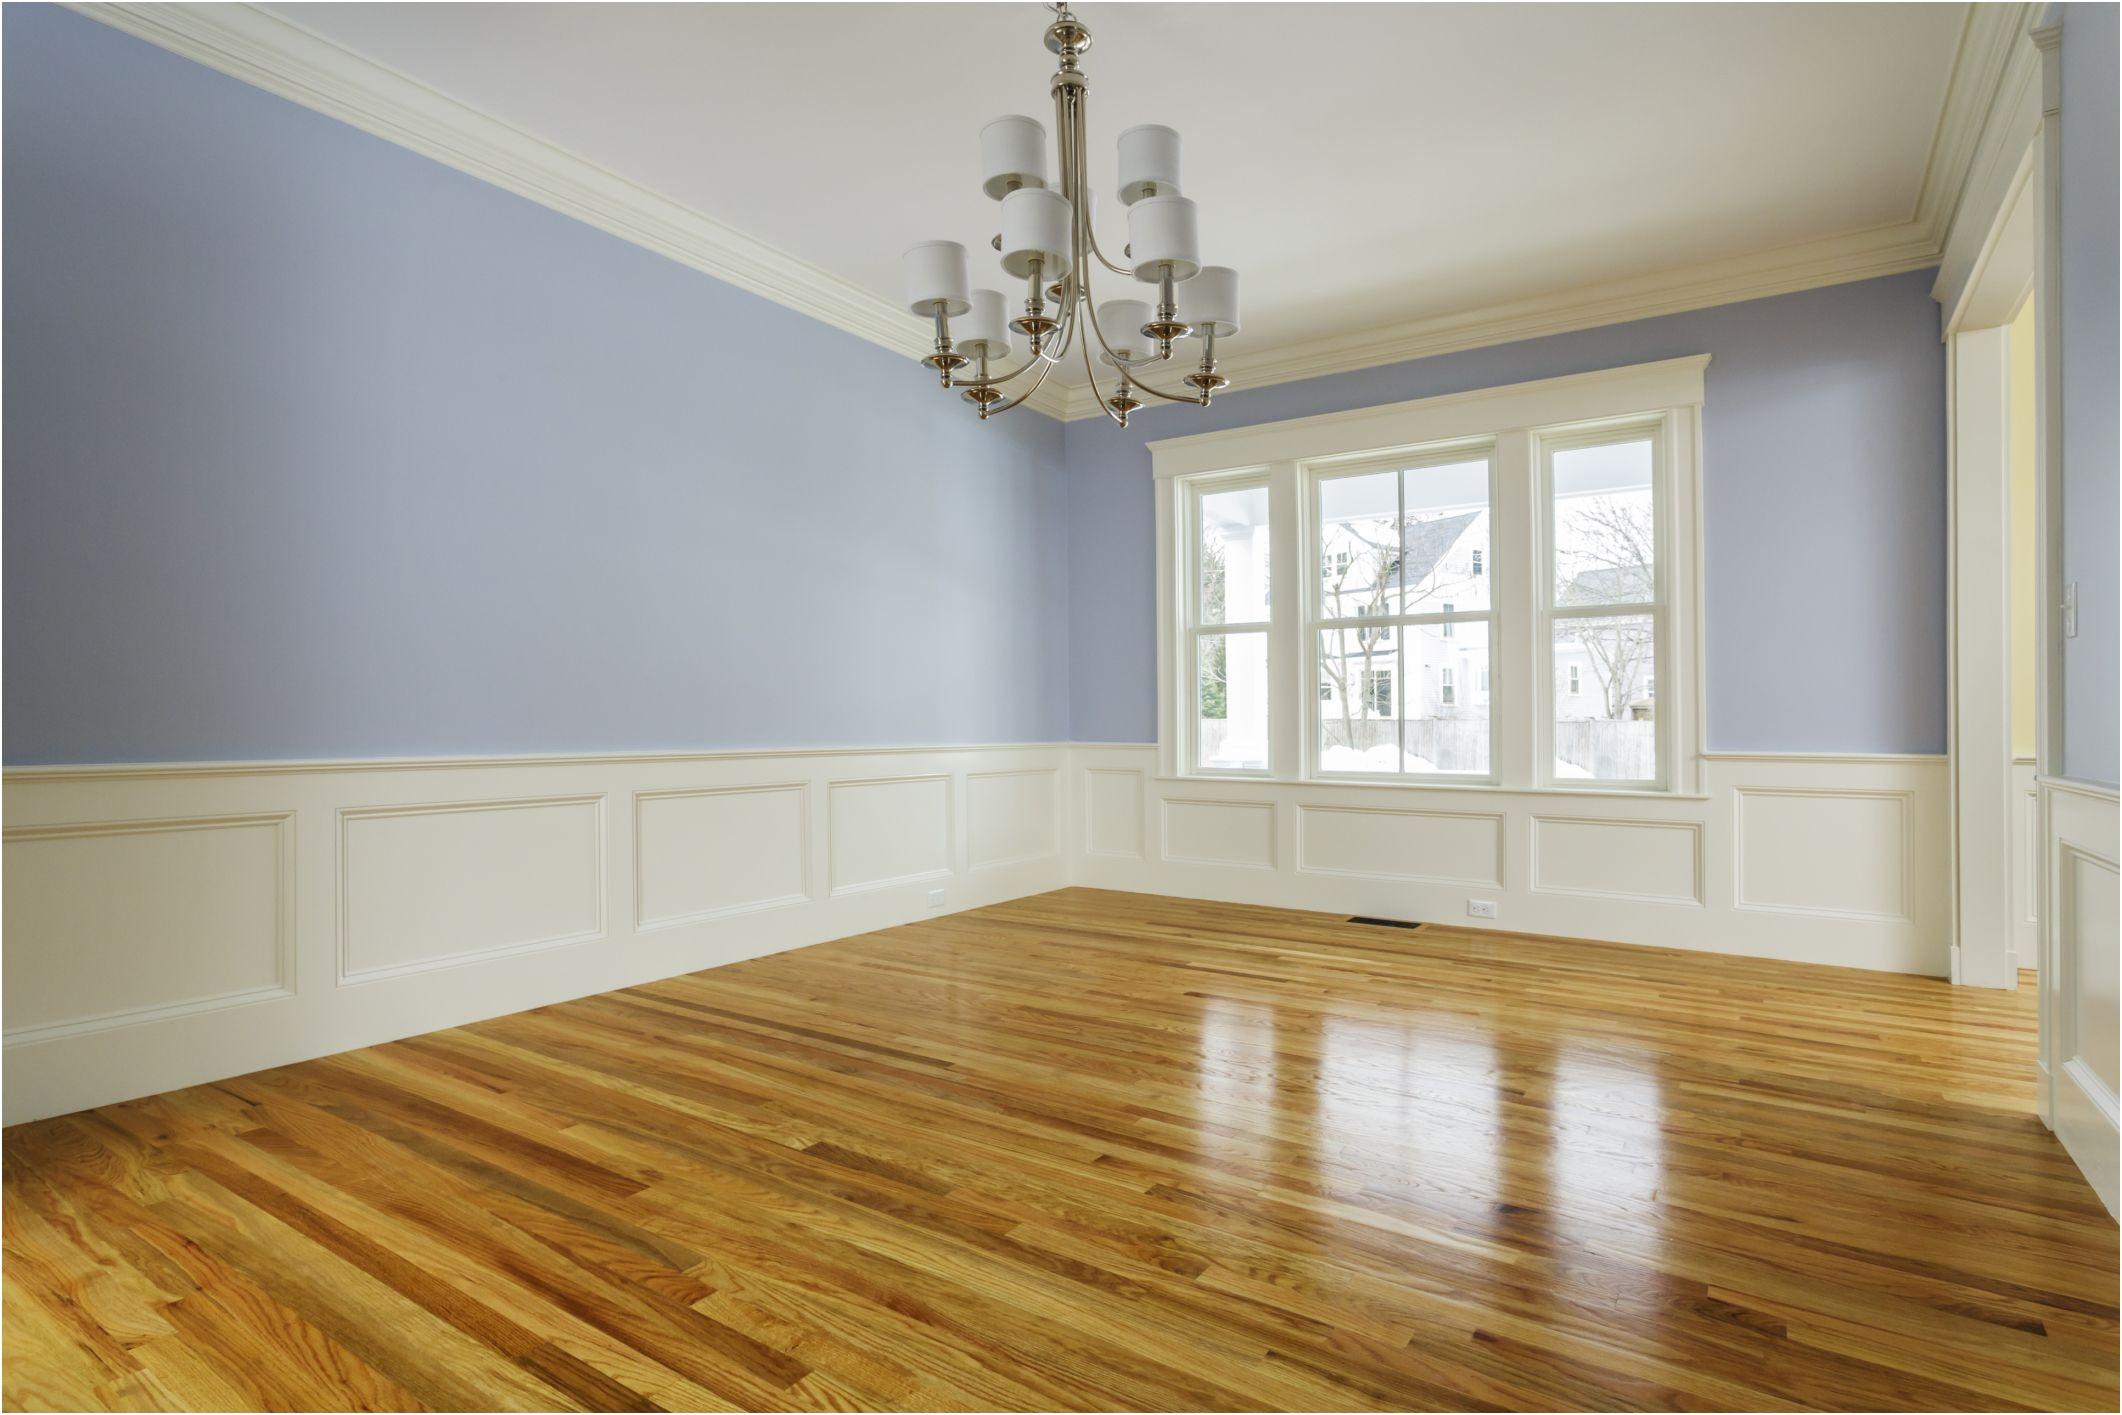 28 attractive Hardwood Floor Refinishing Columbus Ohio 2024 free download hardwood floor refinishing columbus ohio of laminate wood flooring installation cost awesome long island wood in laminate wood flooring installation cost new here s the cost to refinish hard